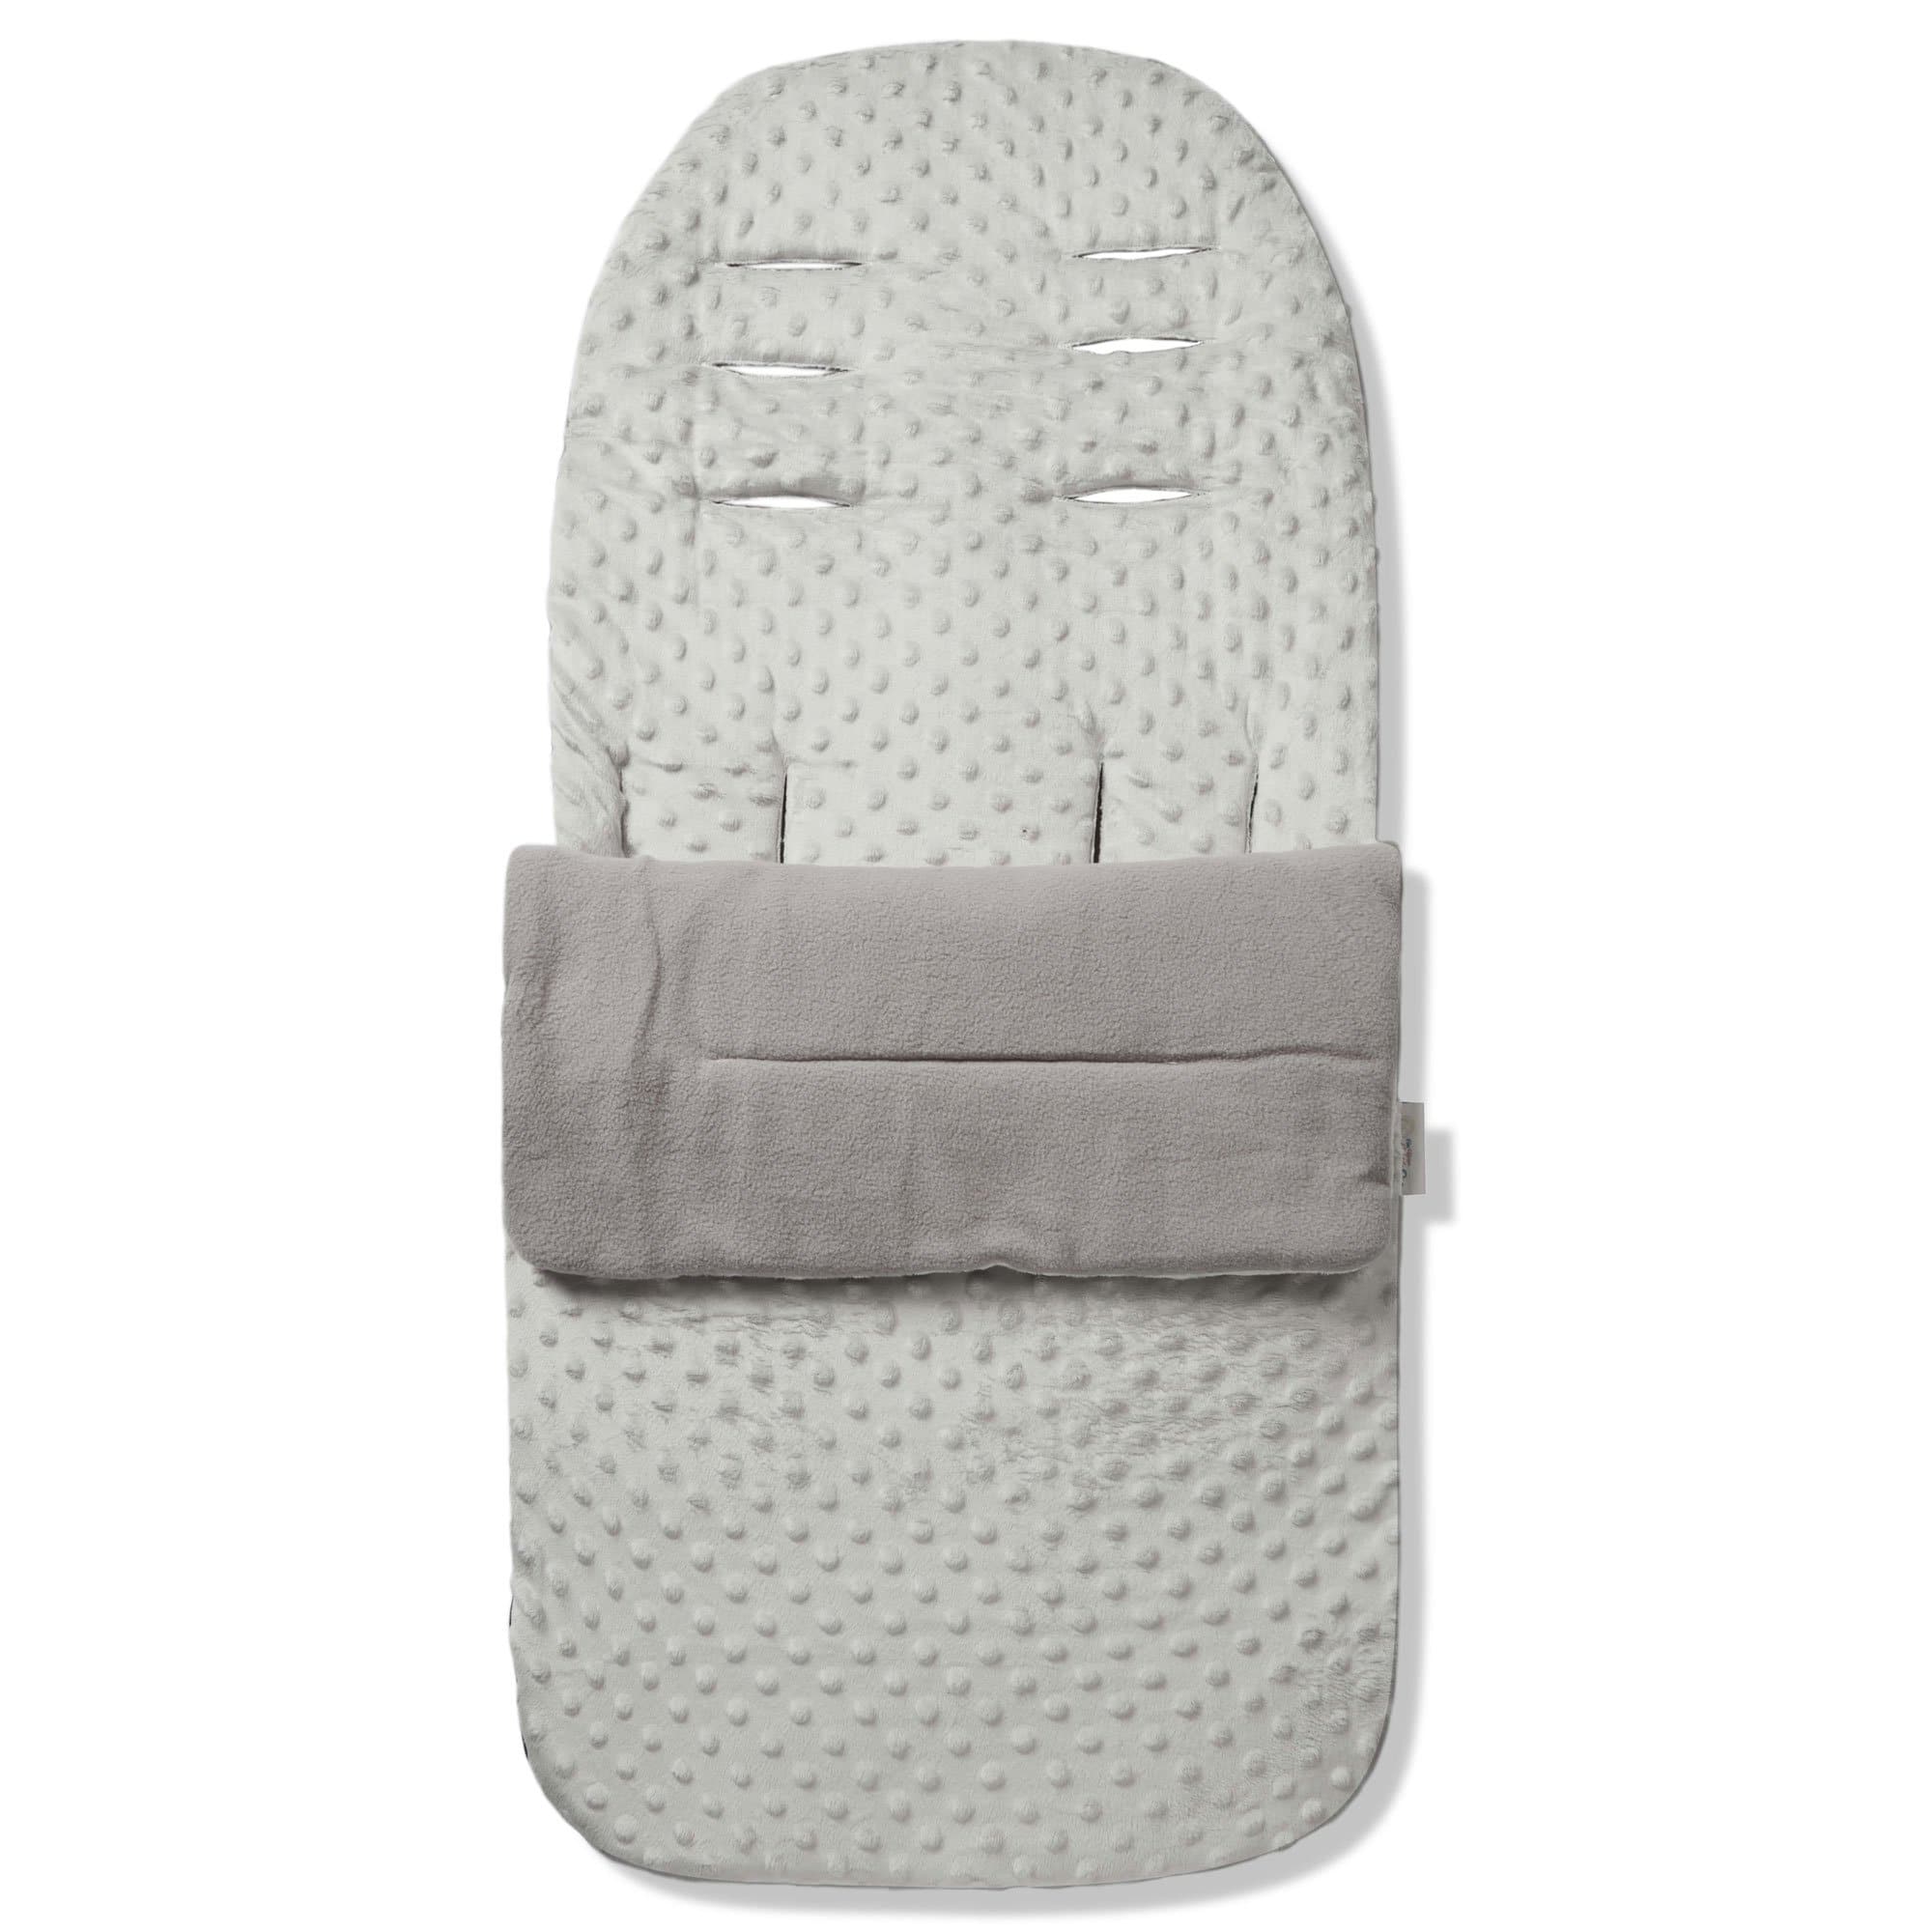 Dimple Footmuff / Cosy Toes Compatible with Firstwheels - Grey / Fits All Models | For Your Little One